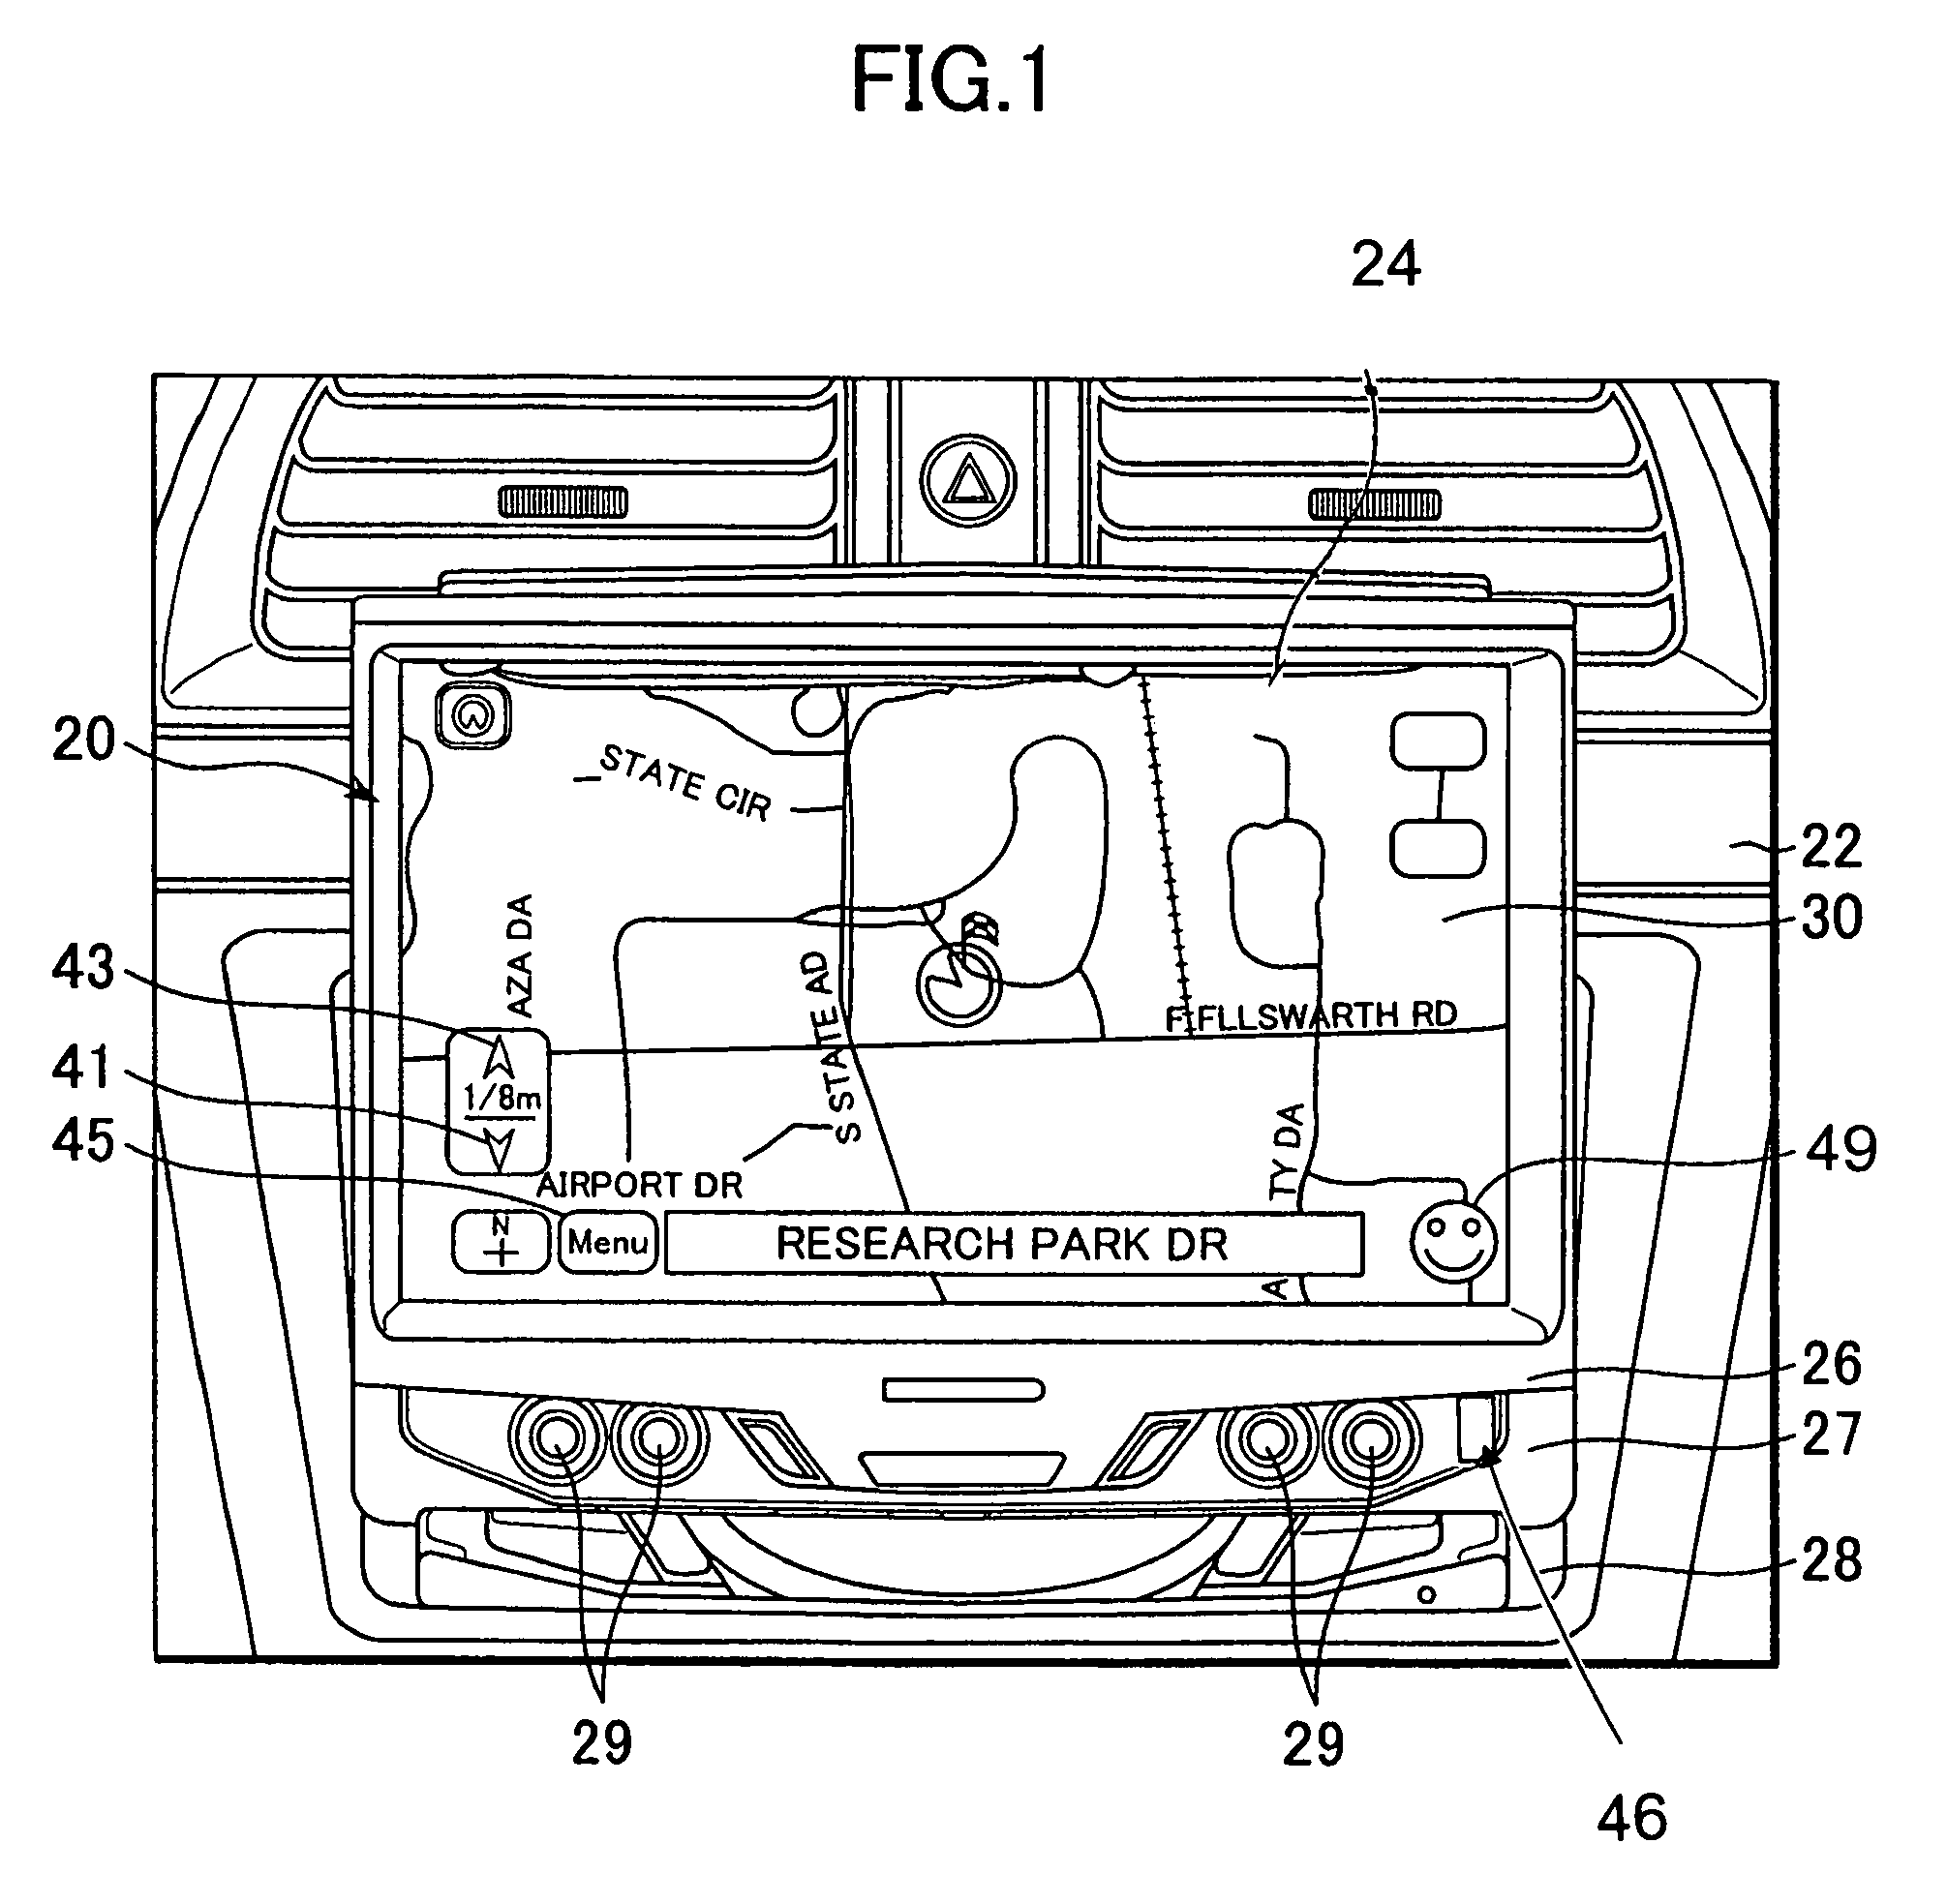 Vehicle navigation system with multi-use display